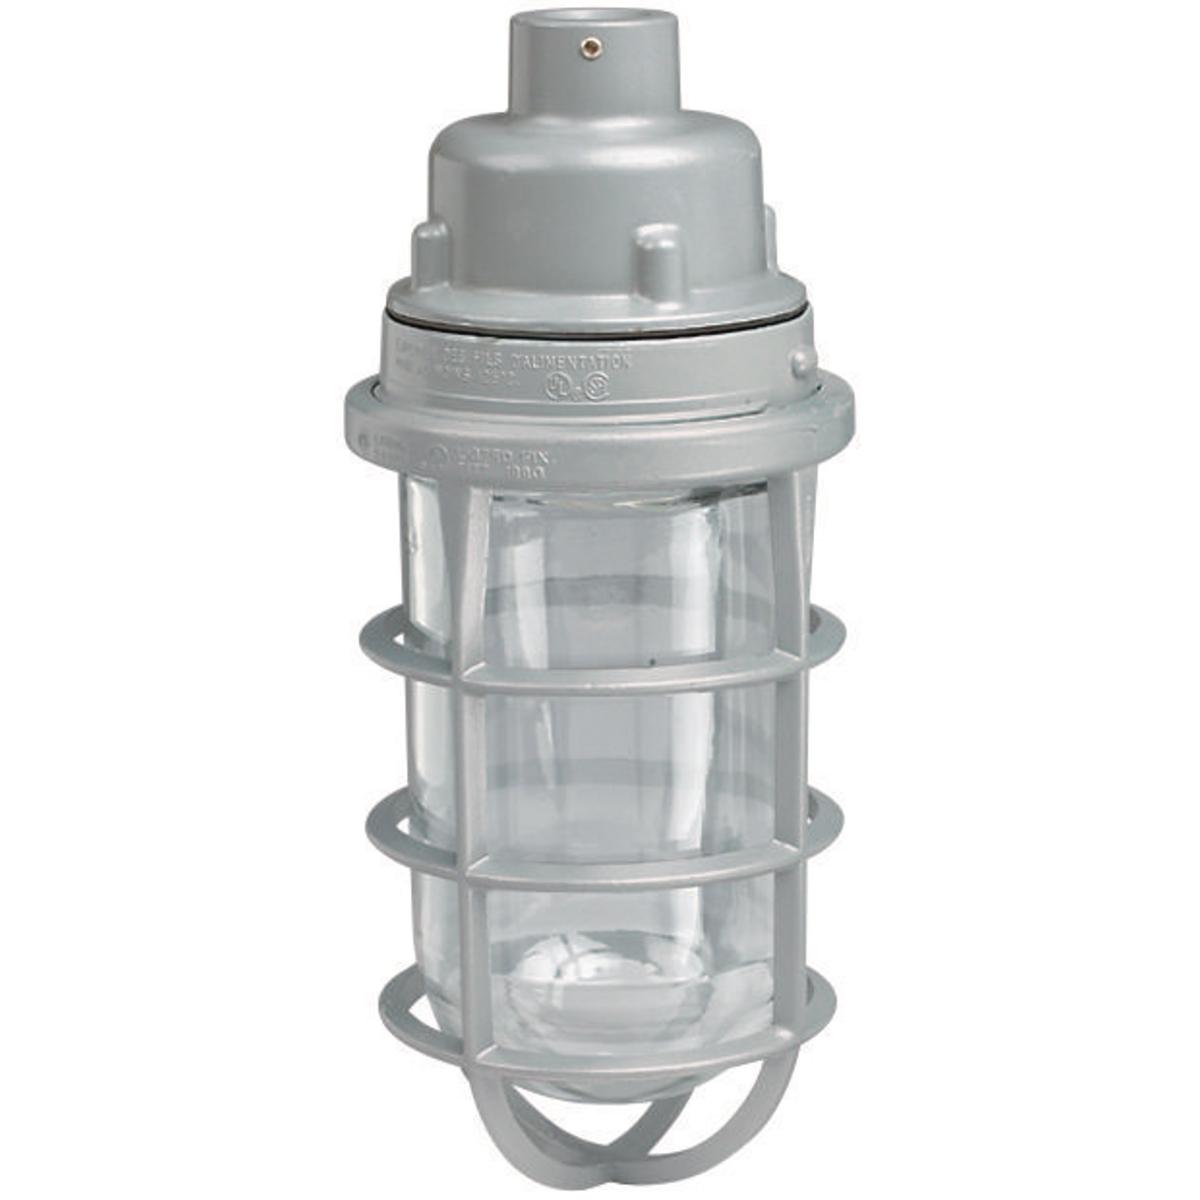 Hubbell VUAGG-1-200 200W V Series Incandescent - Pendant - 1/2" Hub With Globe and Guard  ; Electrostatically applied epoxy/polyester finish ; Modular design ; Hubs are threaded for attachment to conduit ; Set screws in pendant fixture ; Copper-free aluminum (less than .004%